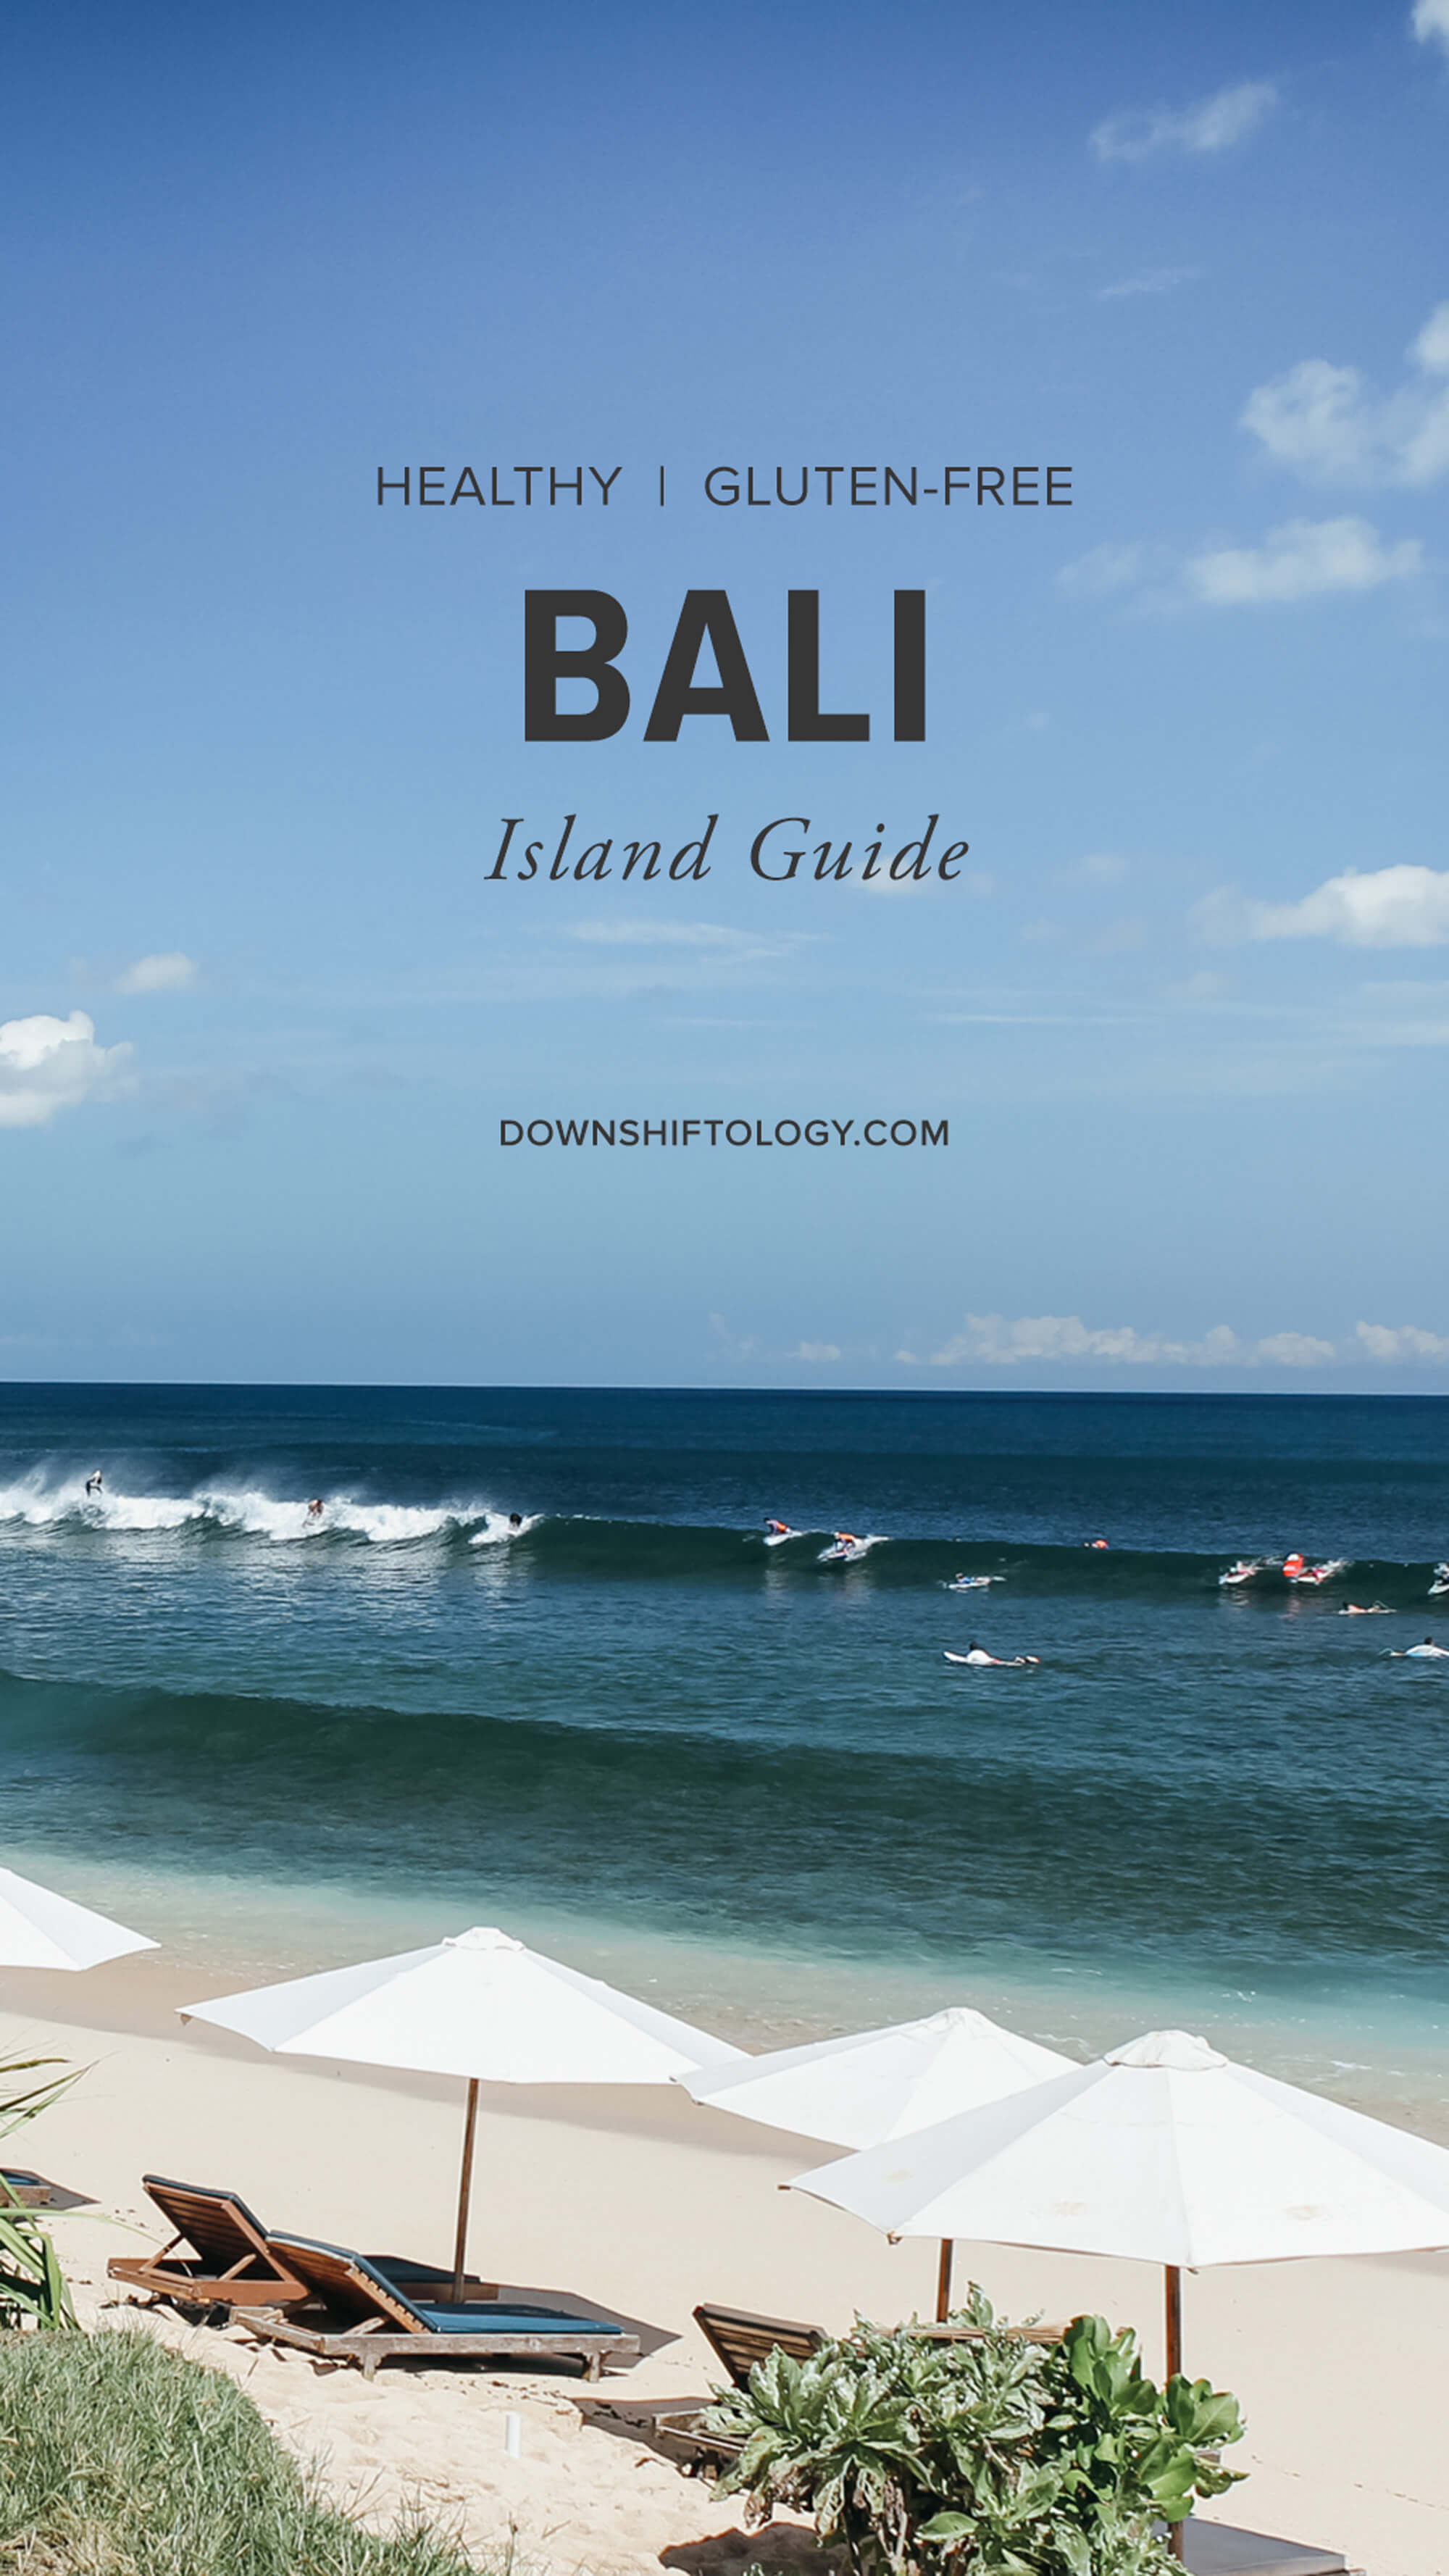 Bali Island Guide: A healthy, real food, gluten-free travel guide to Bali (including Ubud, Seminyak, Canggu, the Bukit and more). 